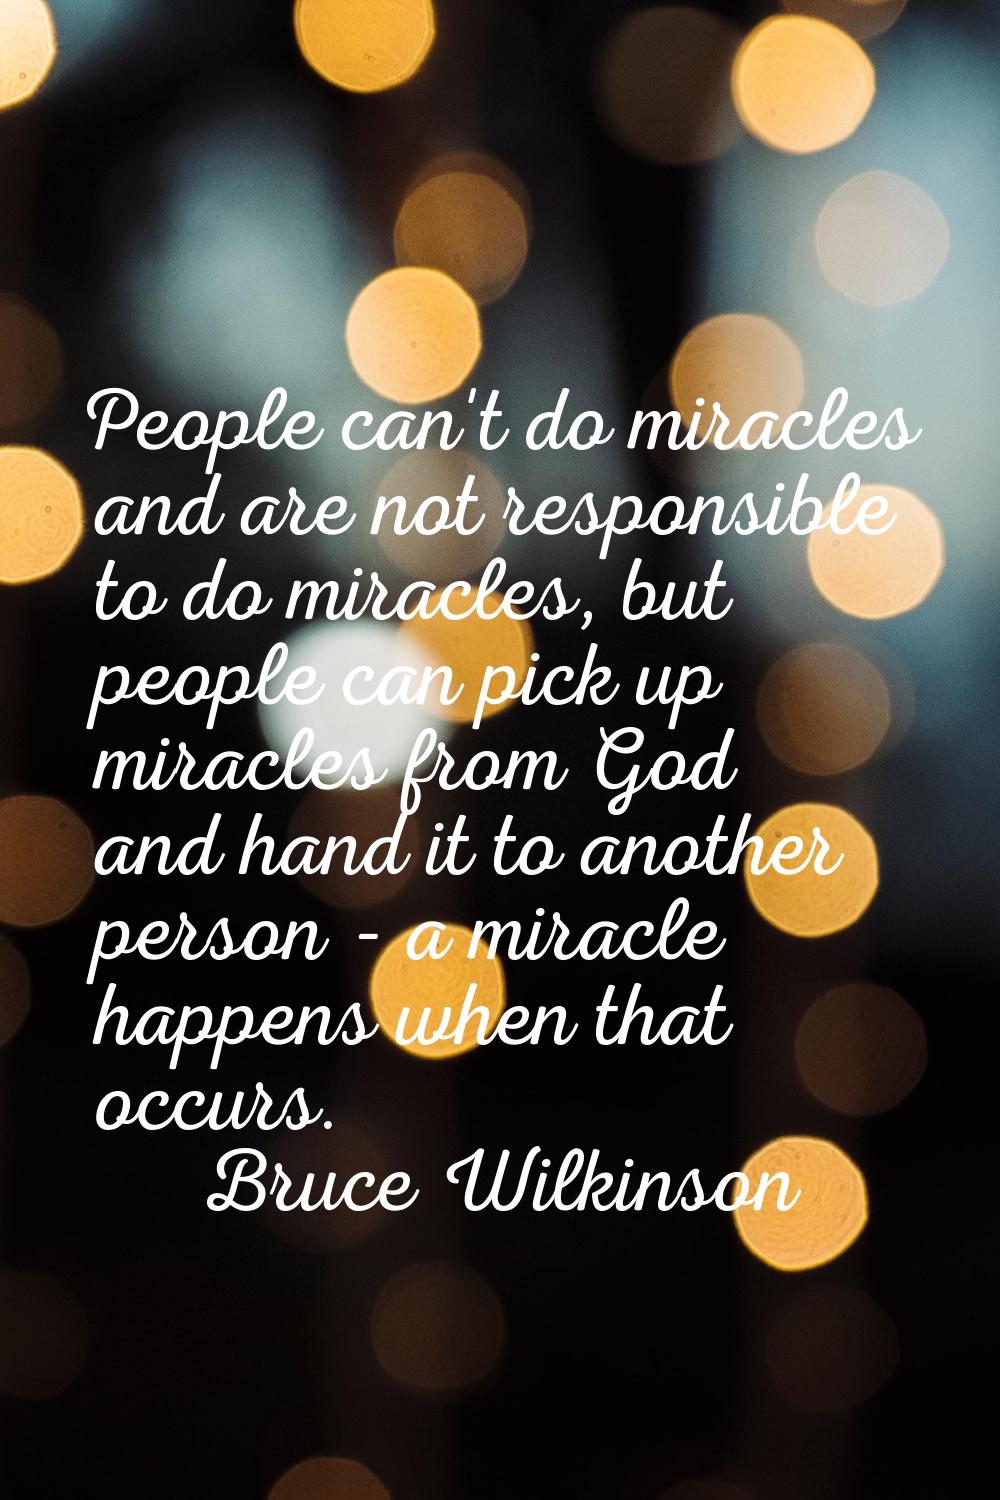 People can't do miracles and are not responsible to do miracles, but people can pick up miracles fr